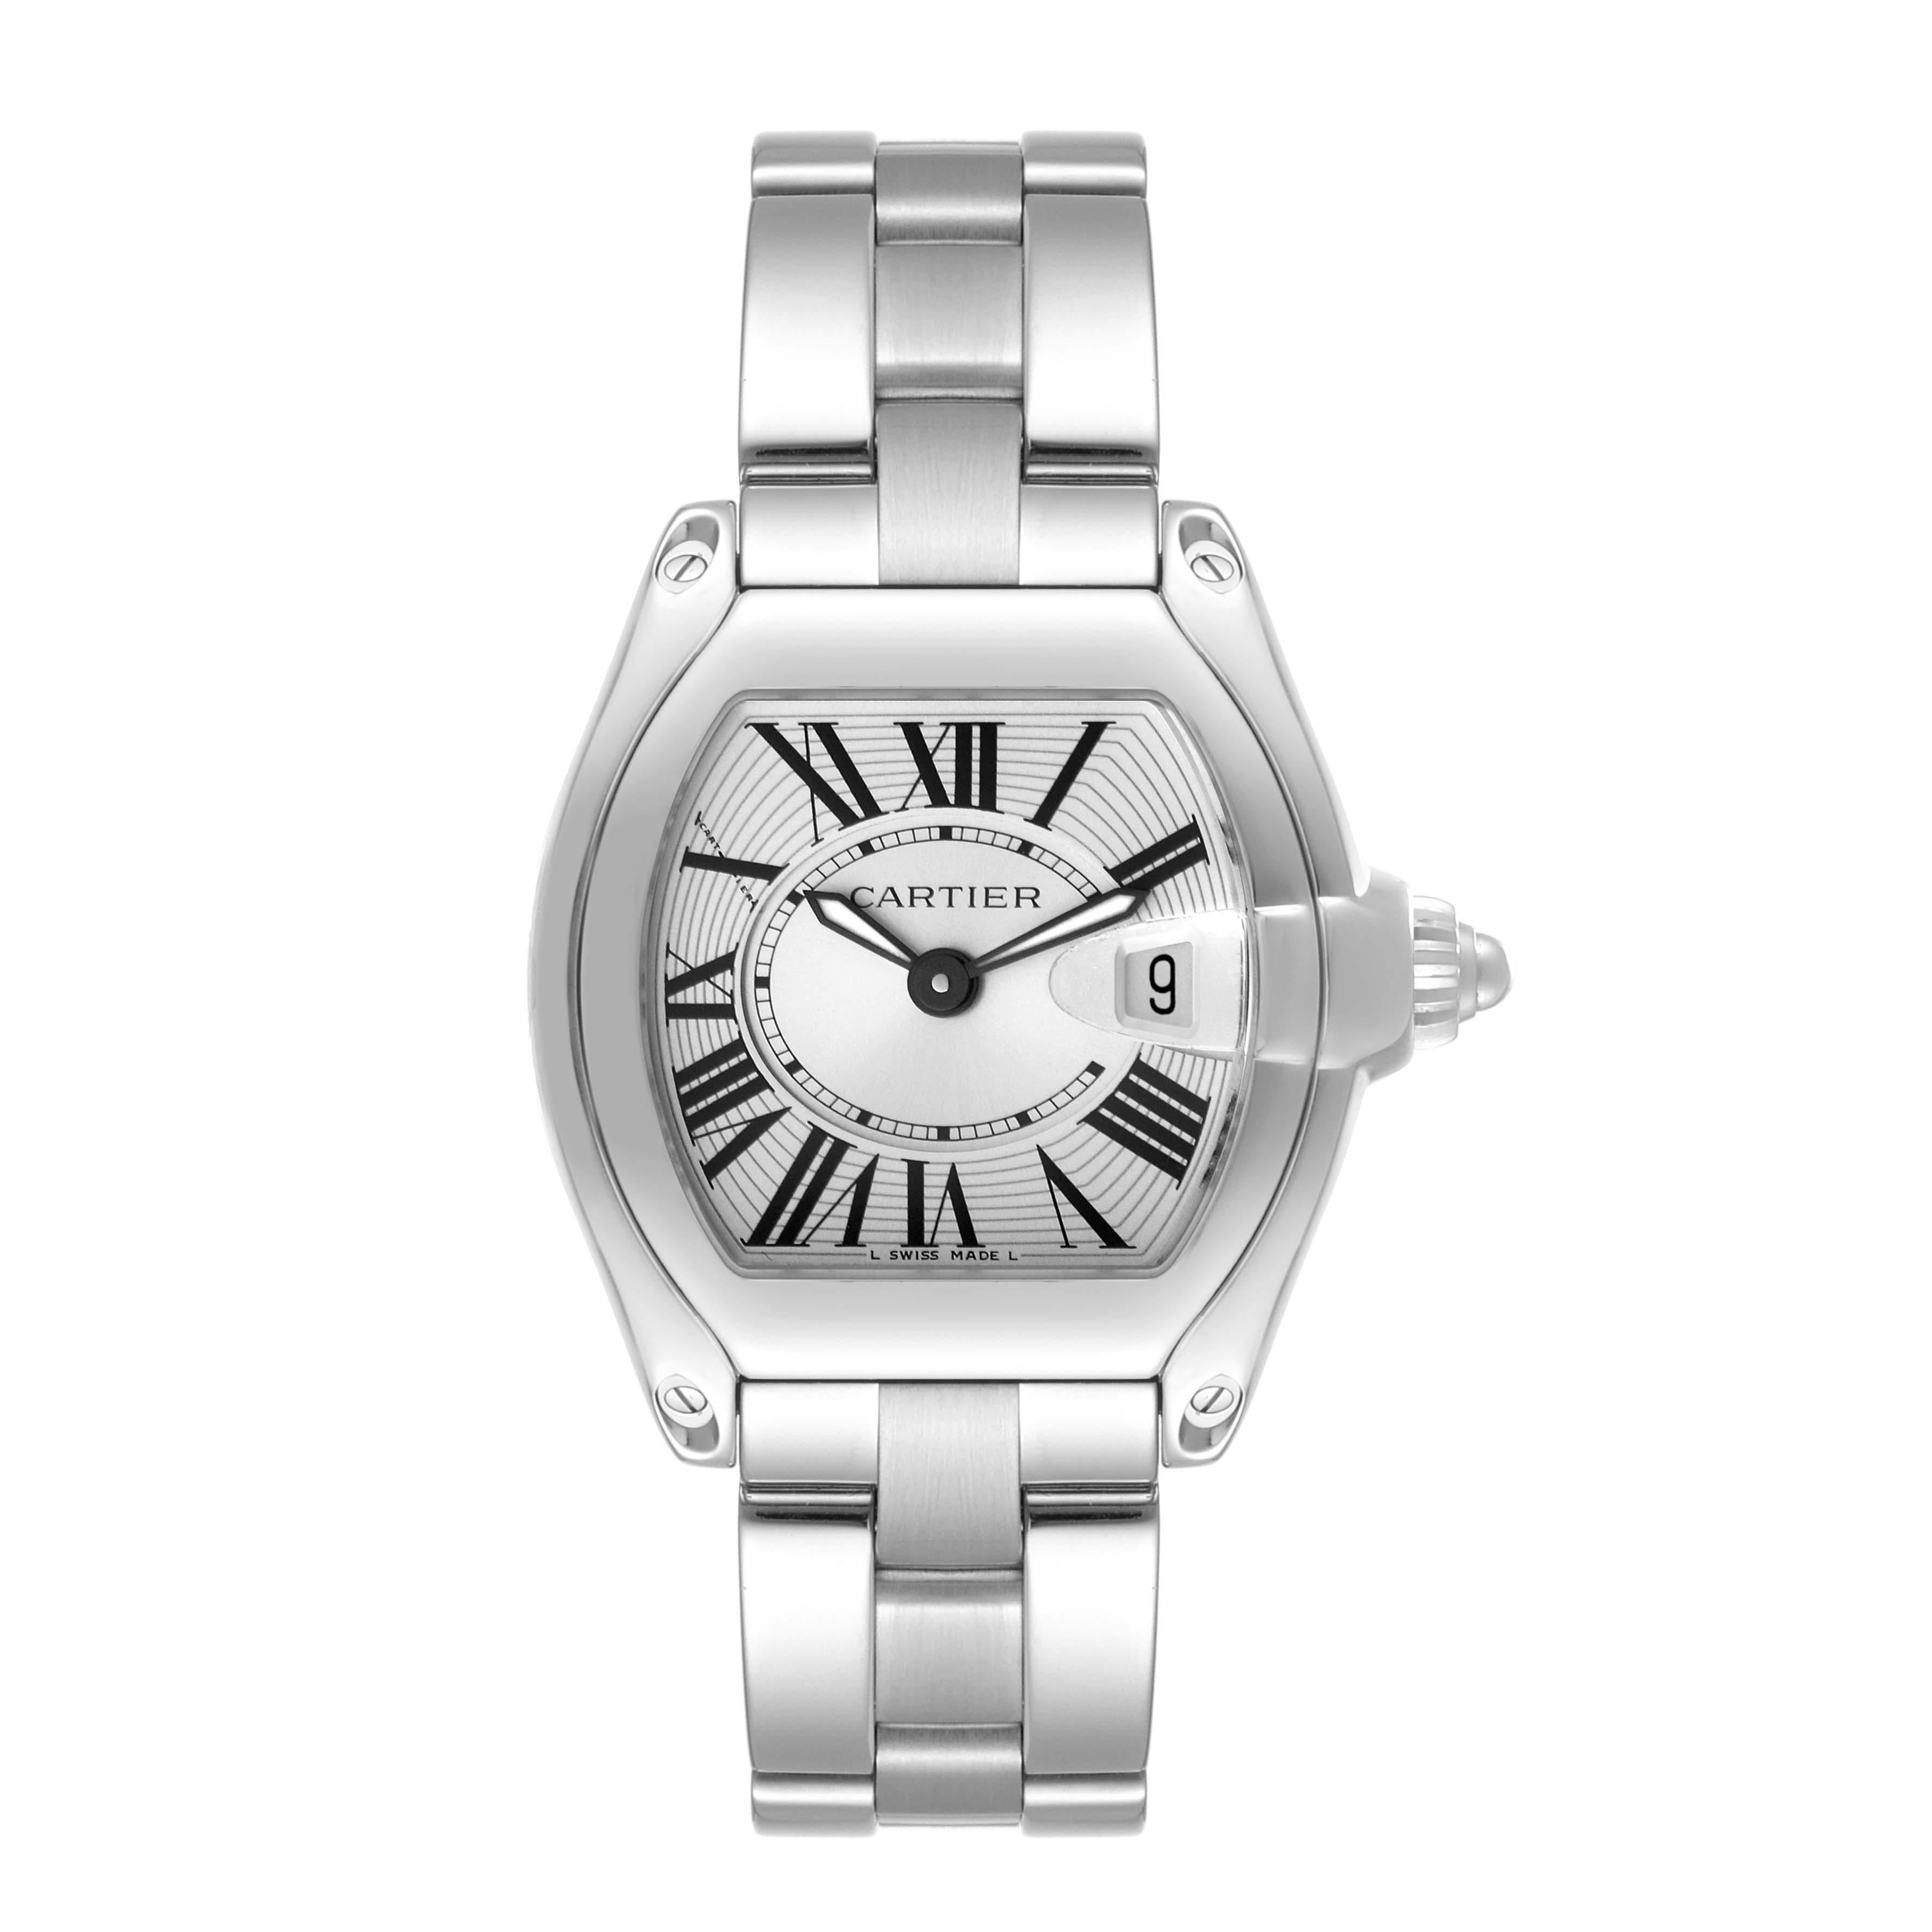 Cartier Roadster Small Silver Dial Steel Ladies Watch W62016V3. Swiss quartz movement caliber 688. Stainless steel tonneau shaped case 36 x 30 mm. . Scratch resistant sapphire crystal with cyclops magnifier. Silver sunray effect dial with black